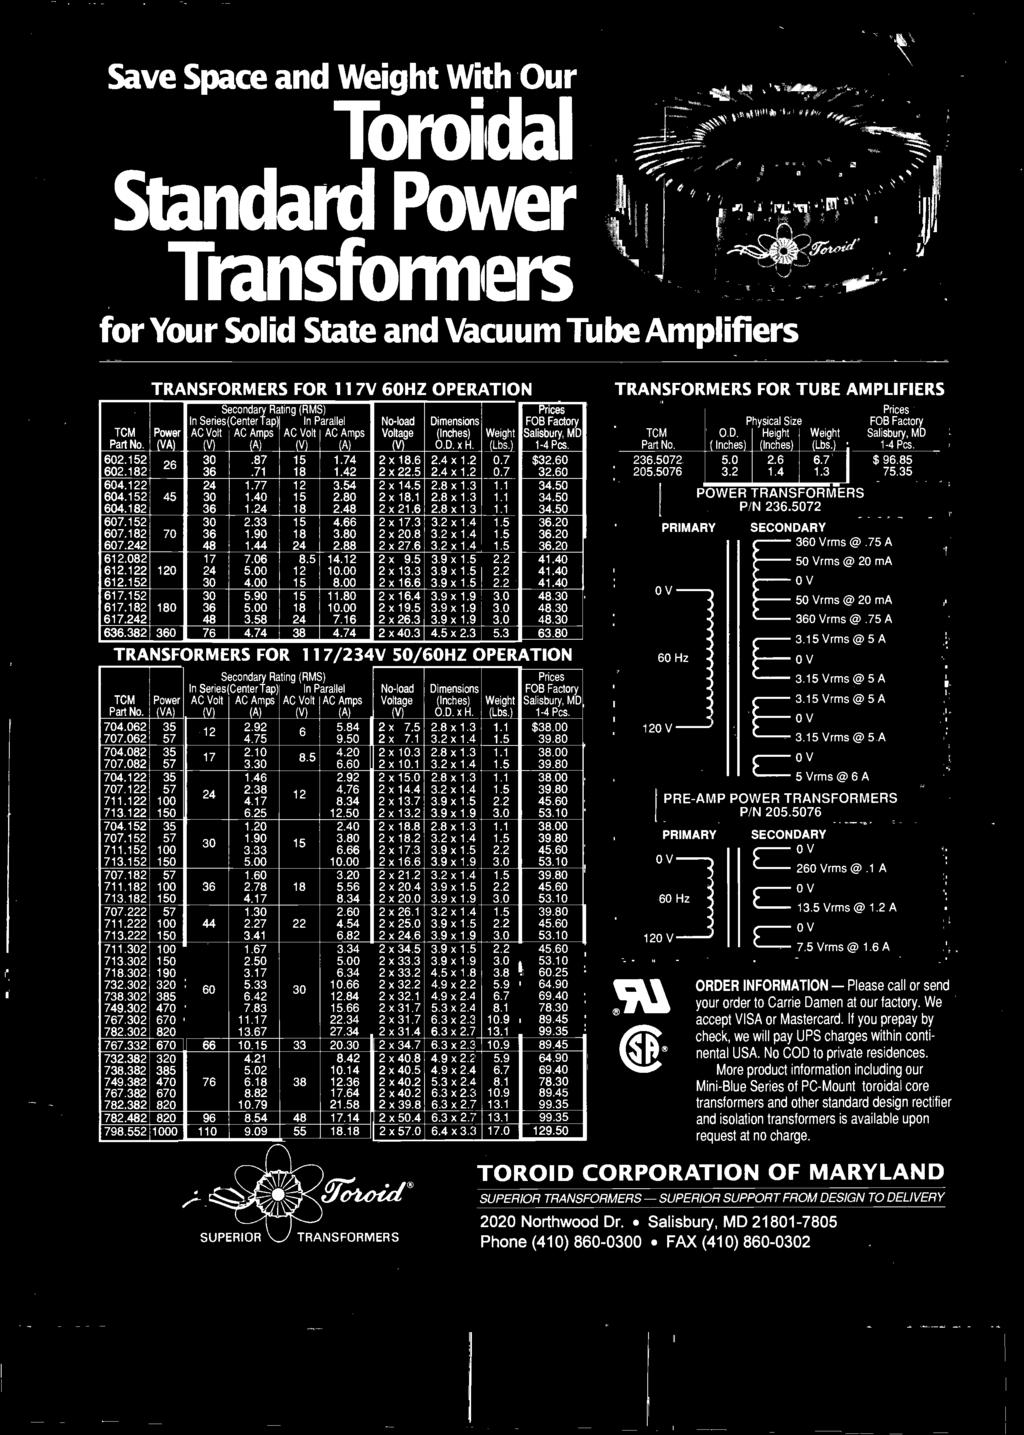 Transformers for Your Solid State and Vacuum Tube Amplifiers - PDF 